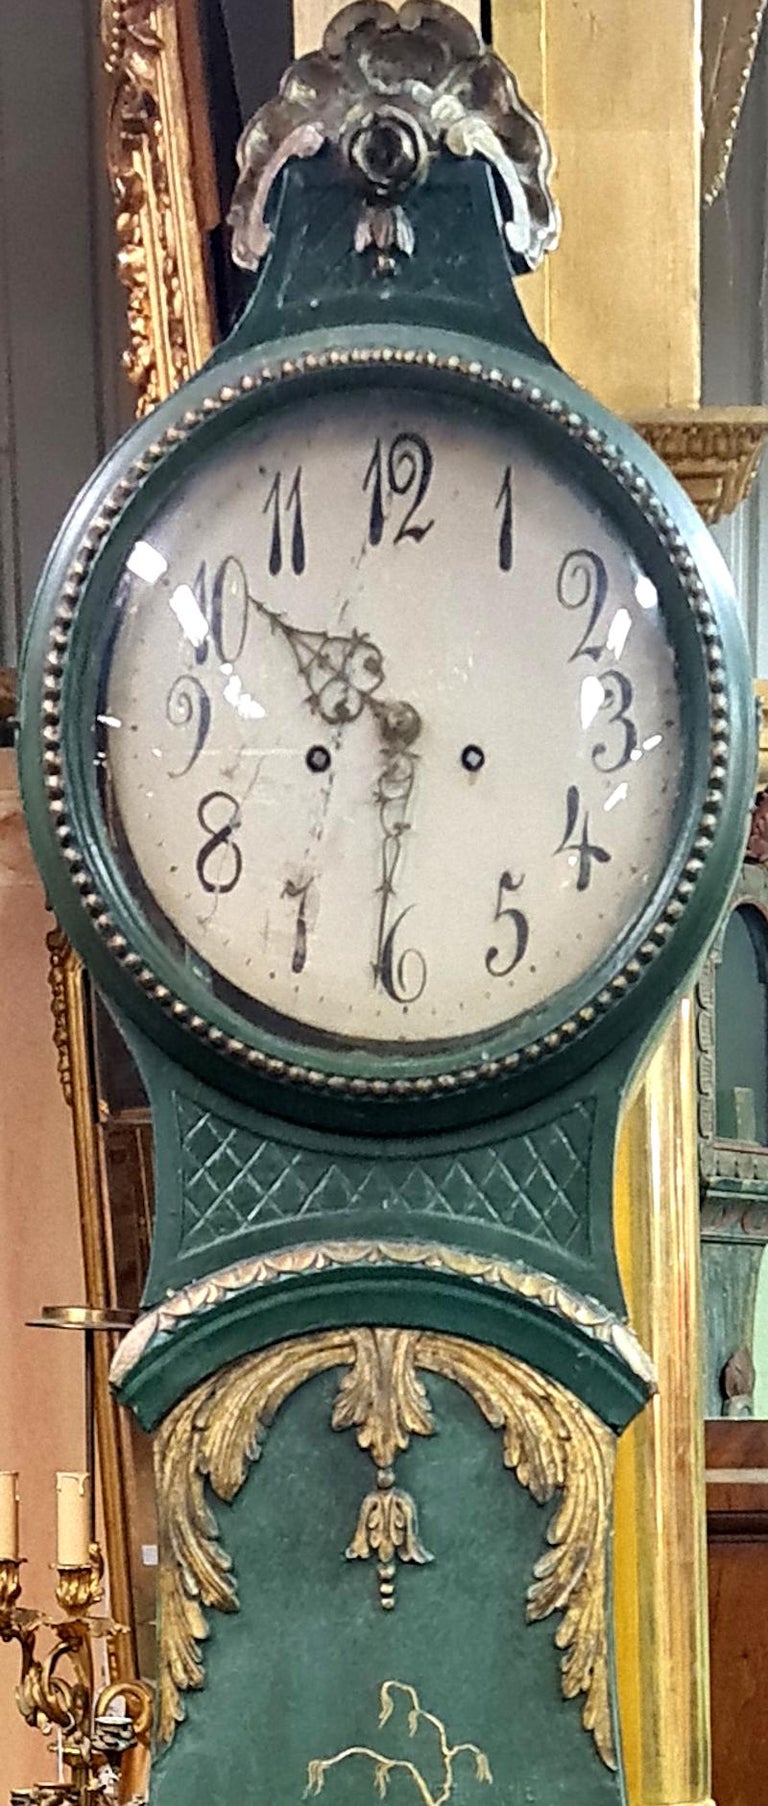 Antique Swedish Rococo mora clock from the late 1700s in lovely Green and Gold finish and amazing chinoiserie detailing with an extended belly shape body, Rococo crown and detail and a clean face in good condition for its age. Measures: 220 cm.

It